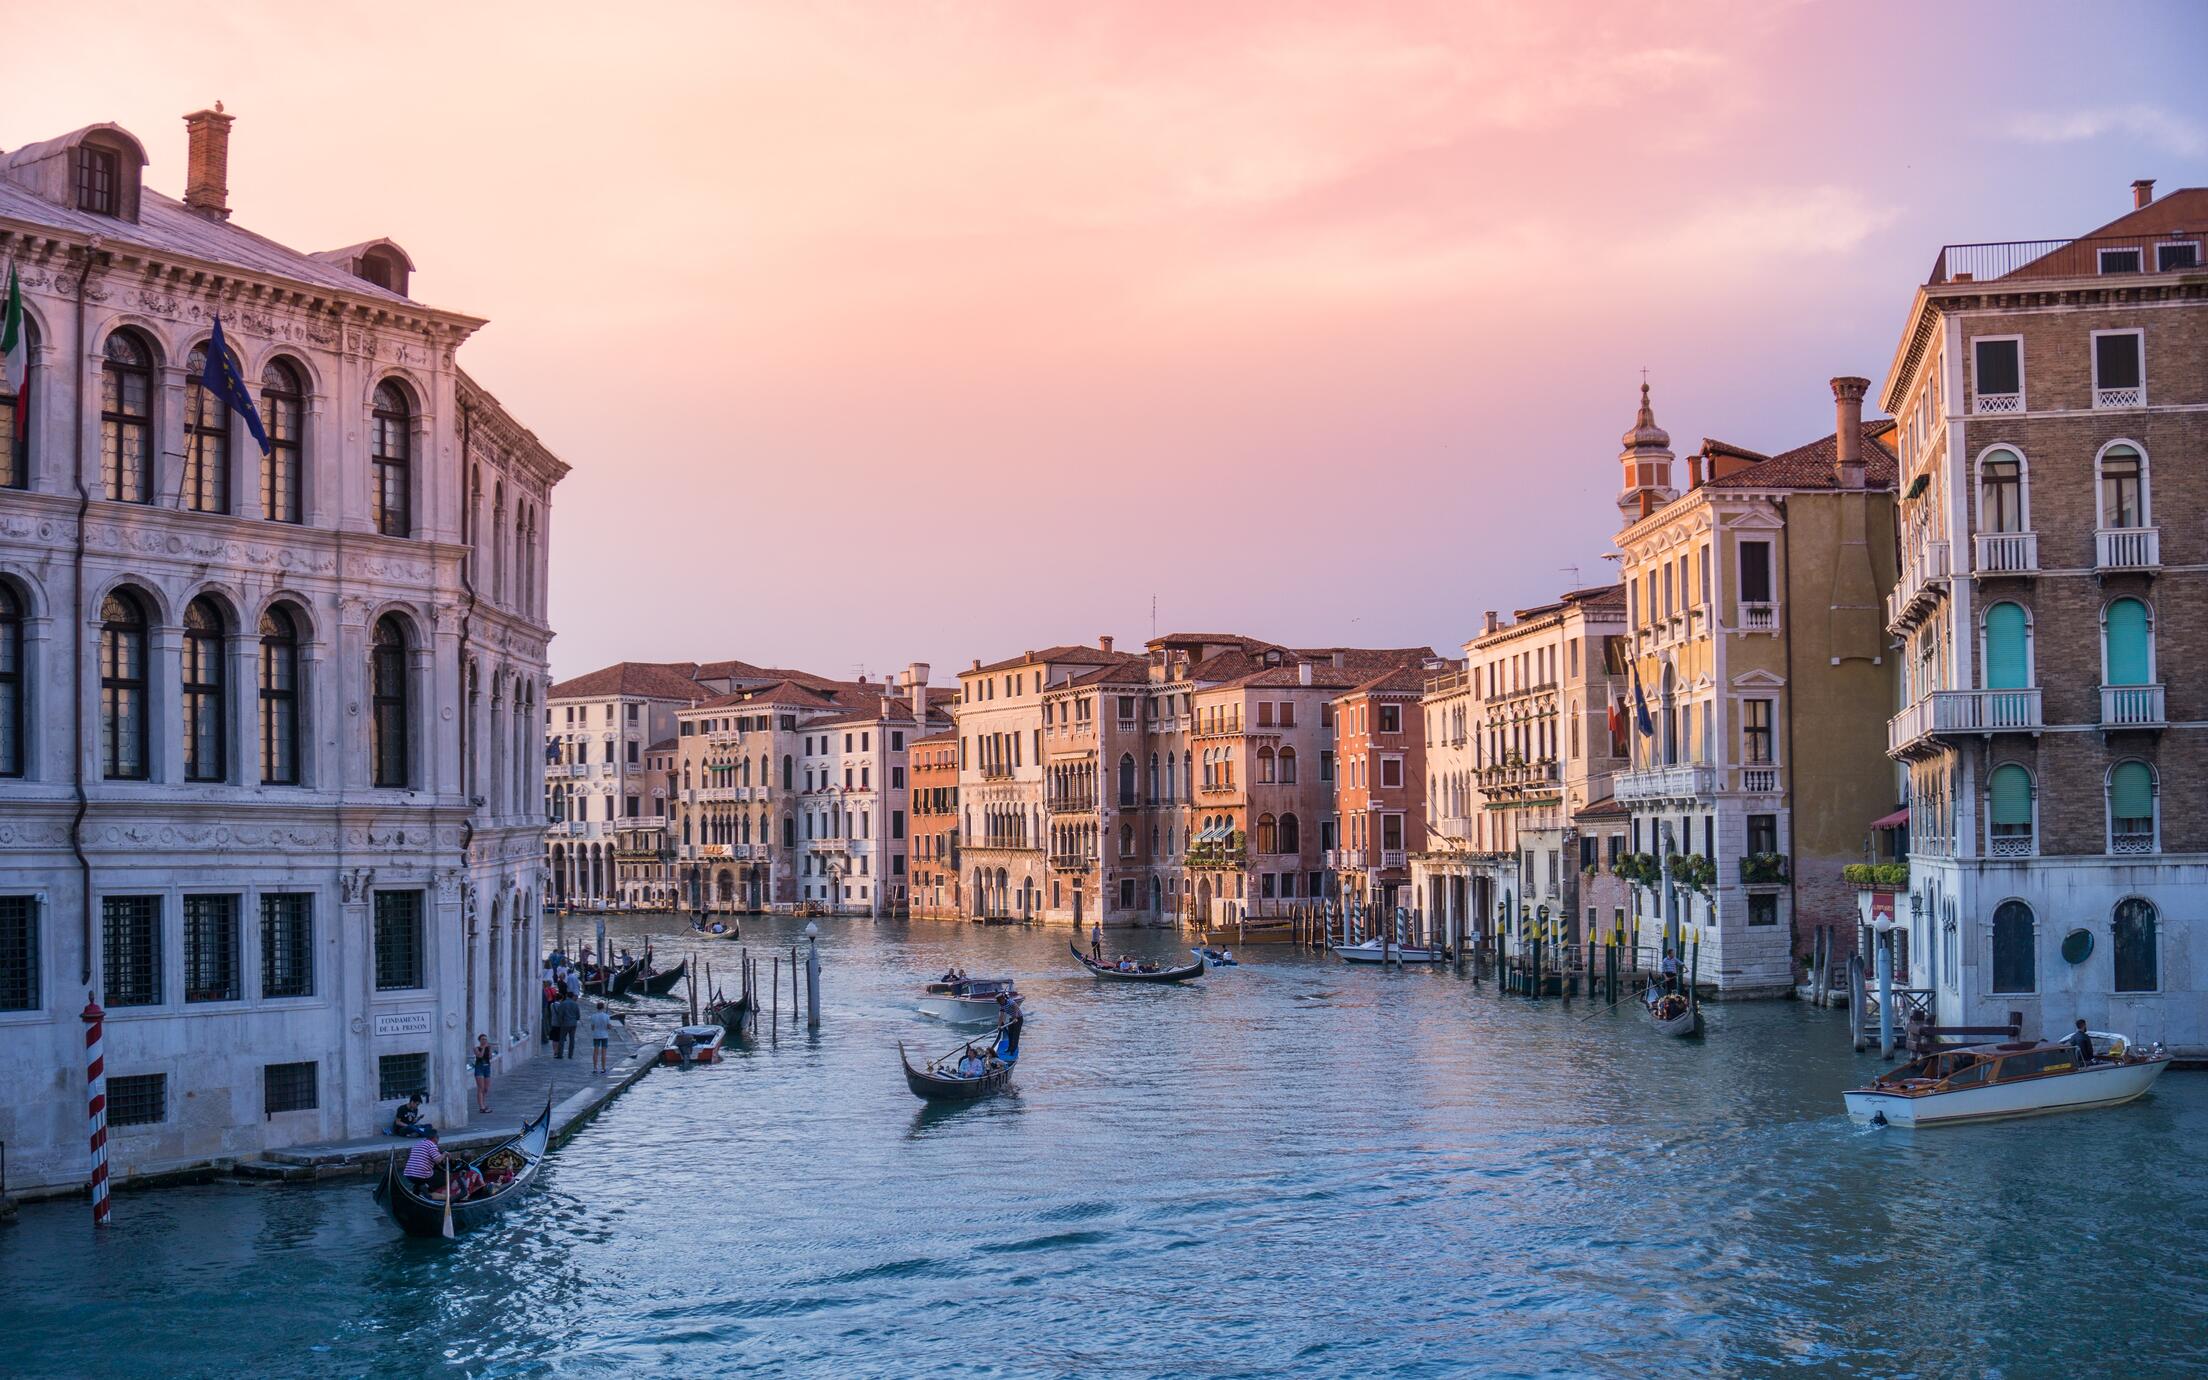 A picture of the canals of Venice at dusk.